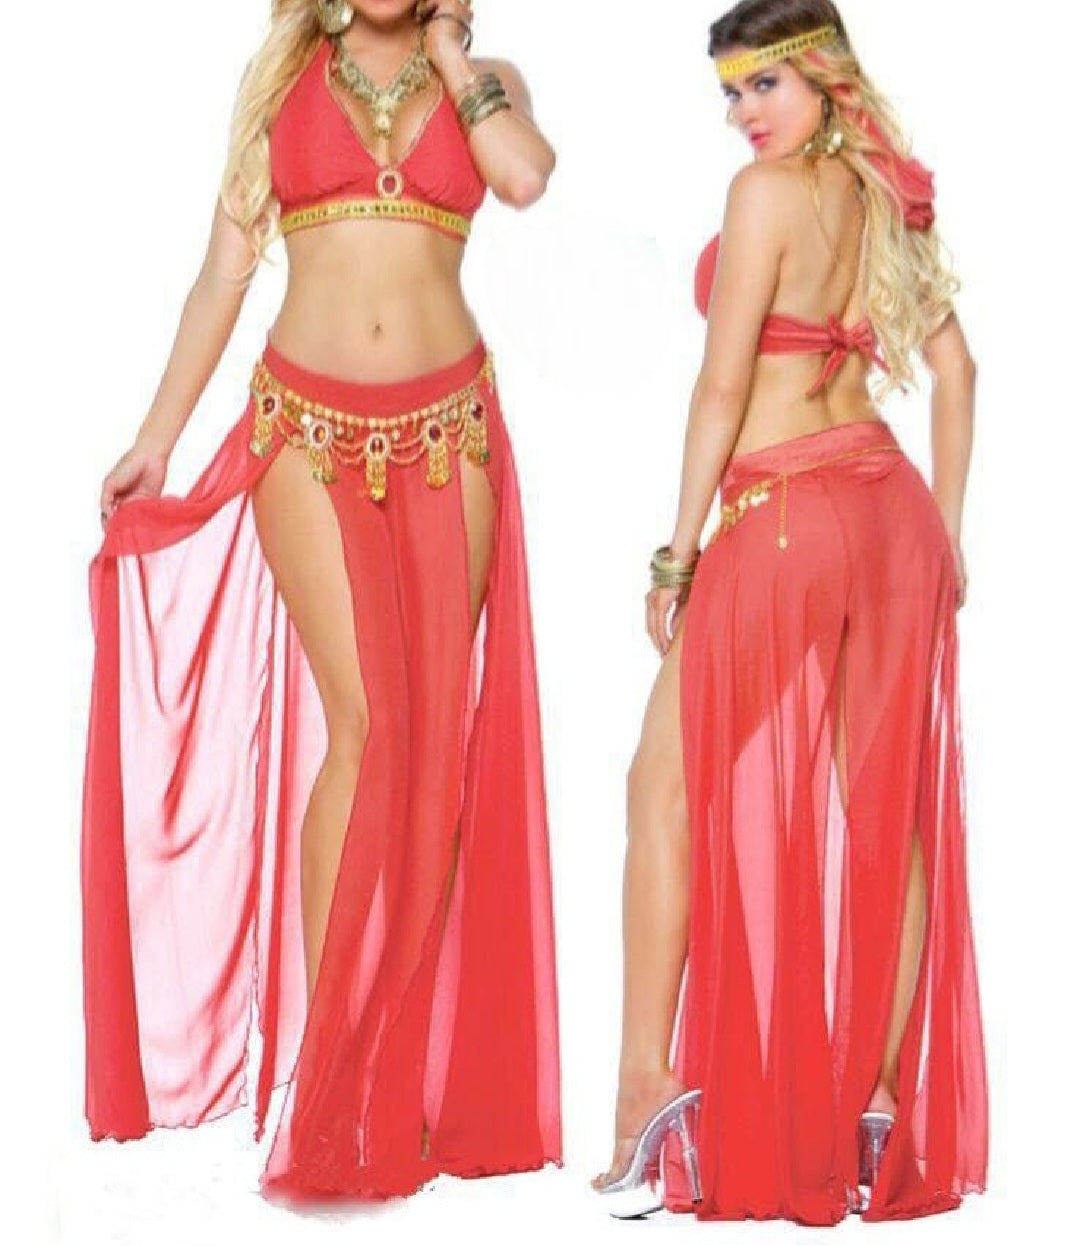 Two-piece belly dance suit made of chiffon with shiny metal chains around the middle